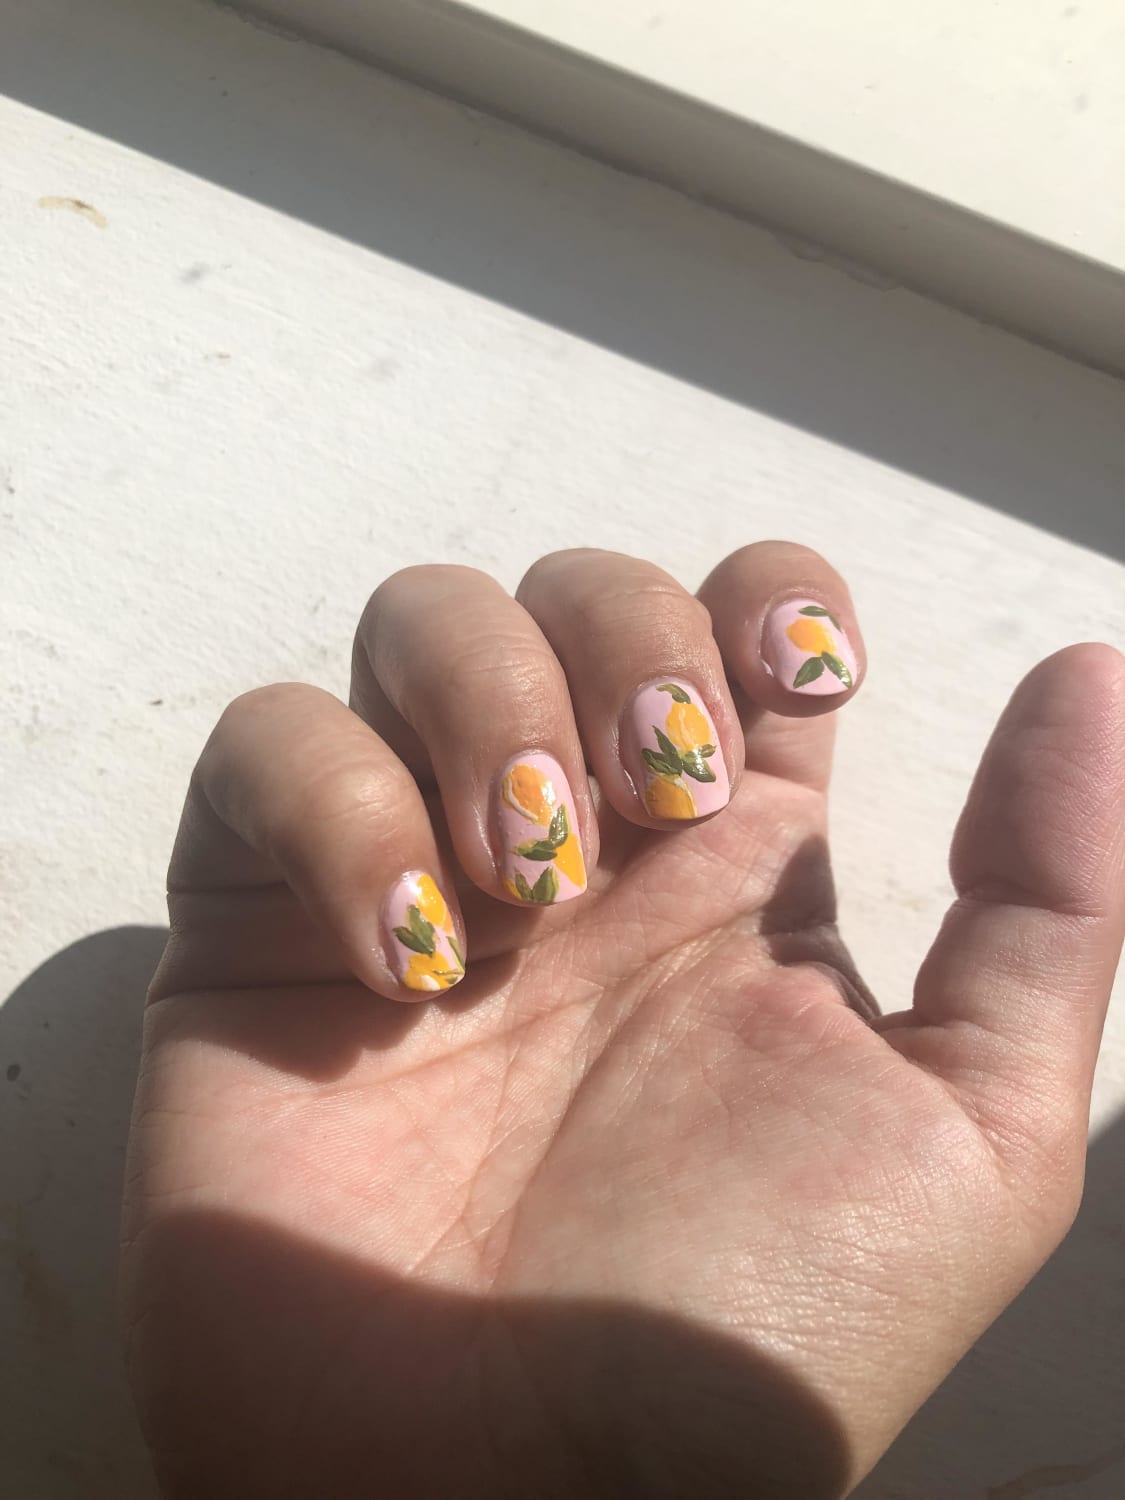 Tiny lemons freehanded with my non-dominant hand. Second ever freehand!